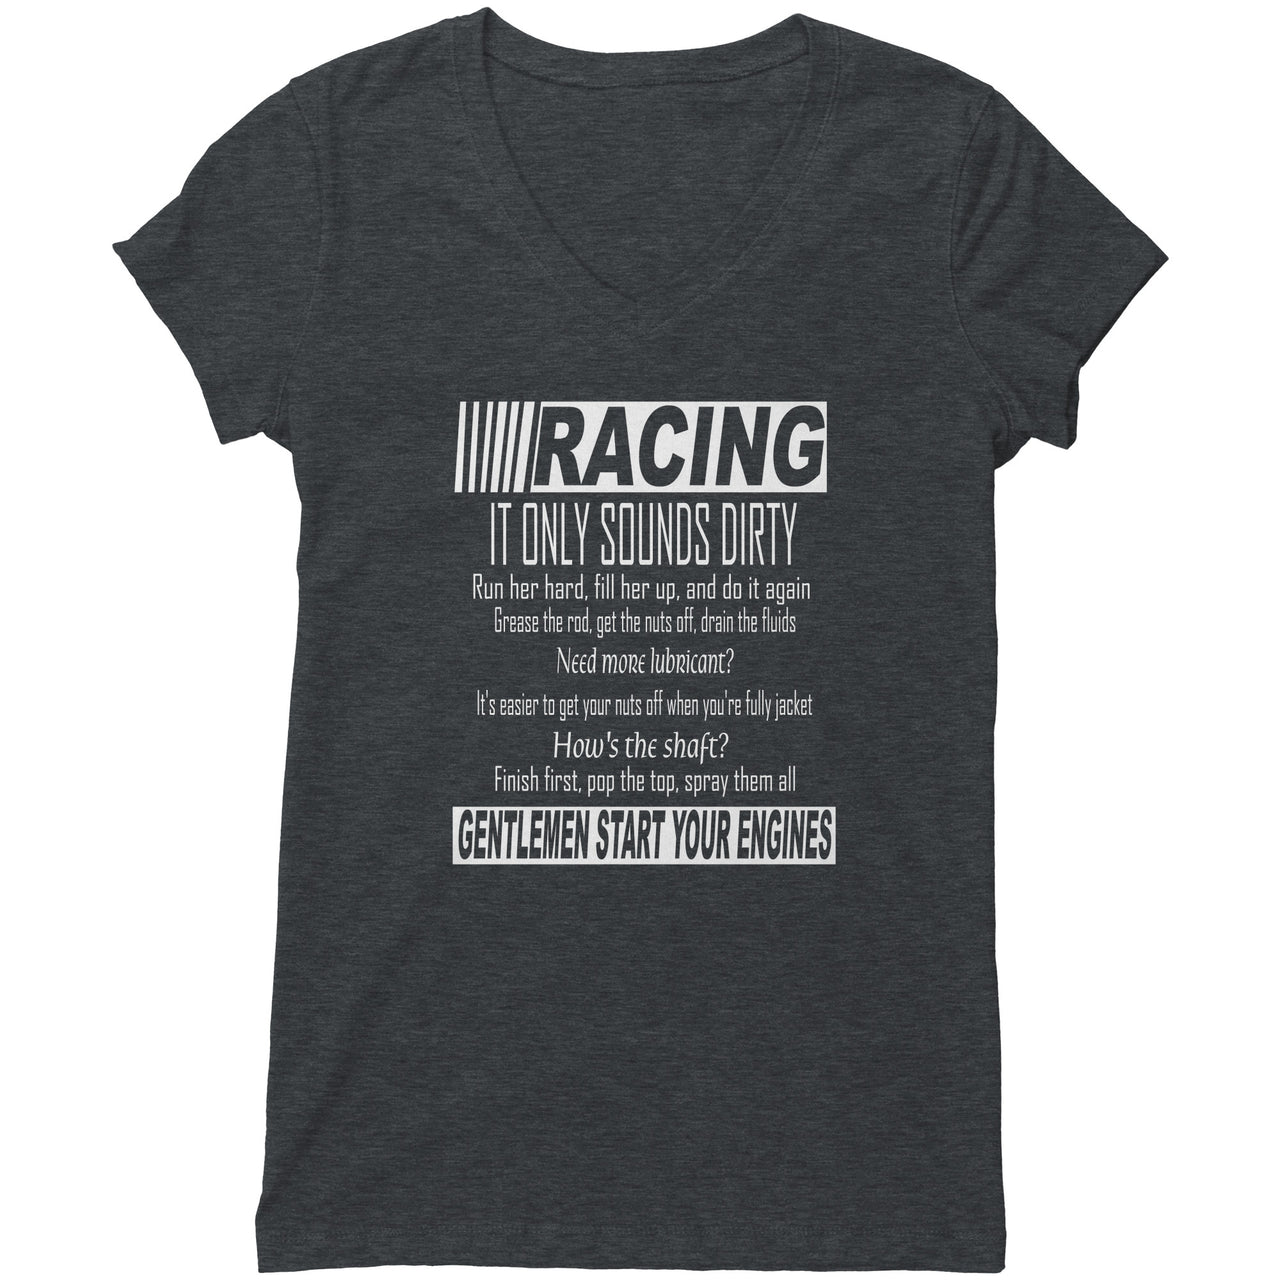 Racing It only sounds dirty Women's T-Shirts/Hoodies WV